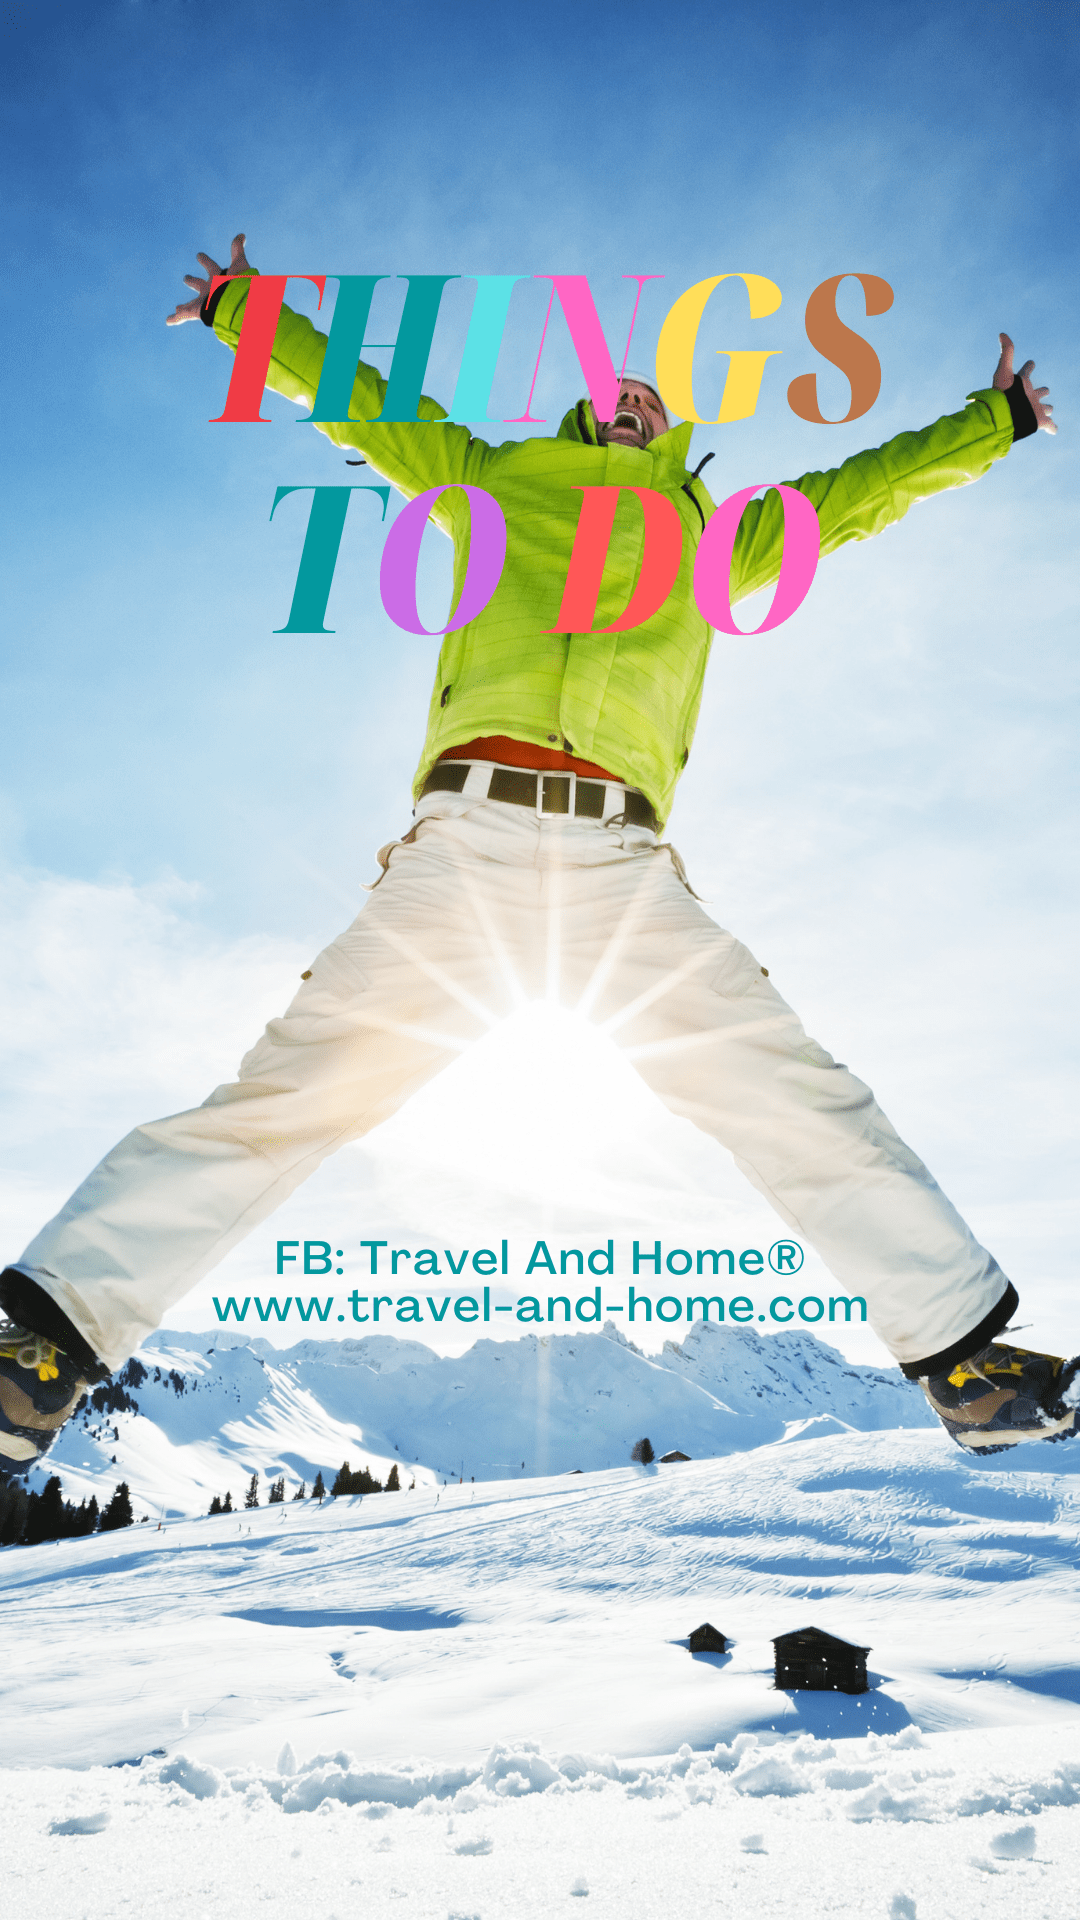 Things to do around the world - Guy in ski suit happy on the slopes - jumping in the air.